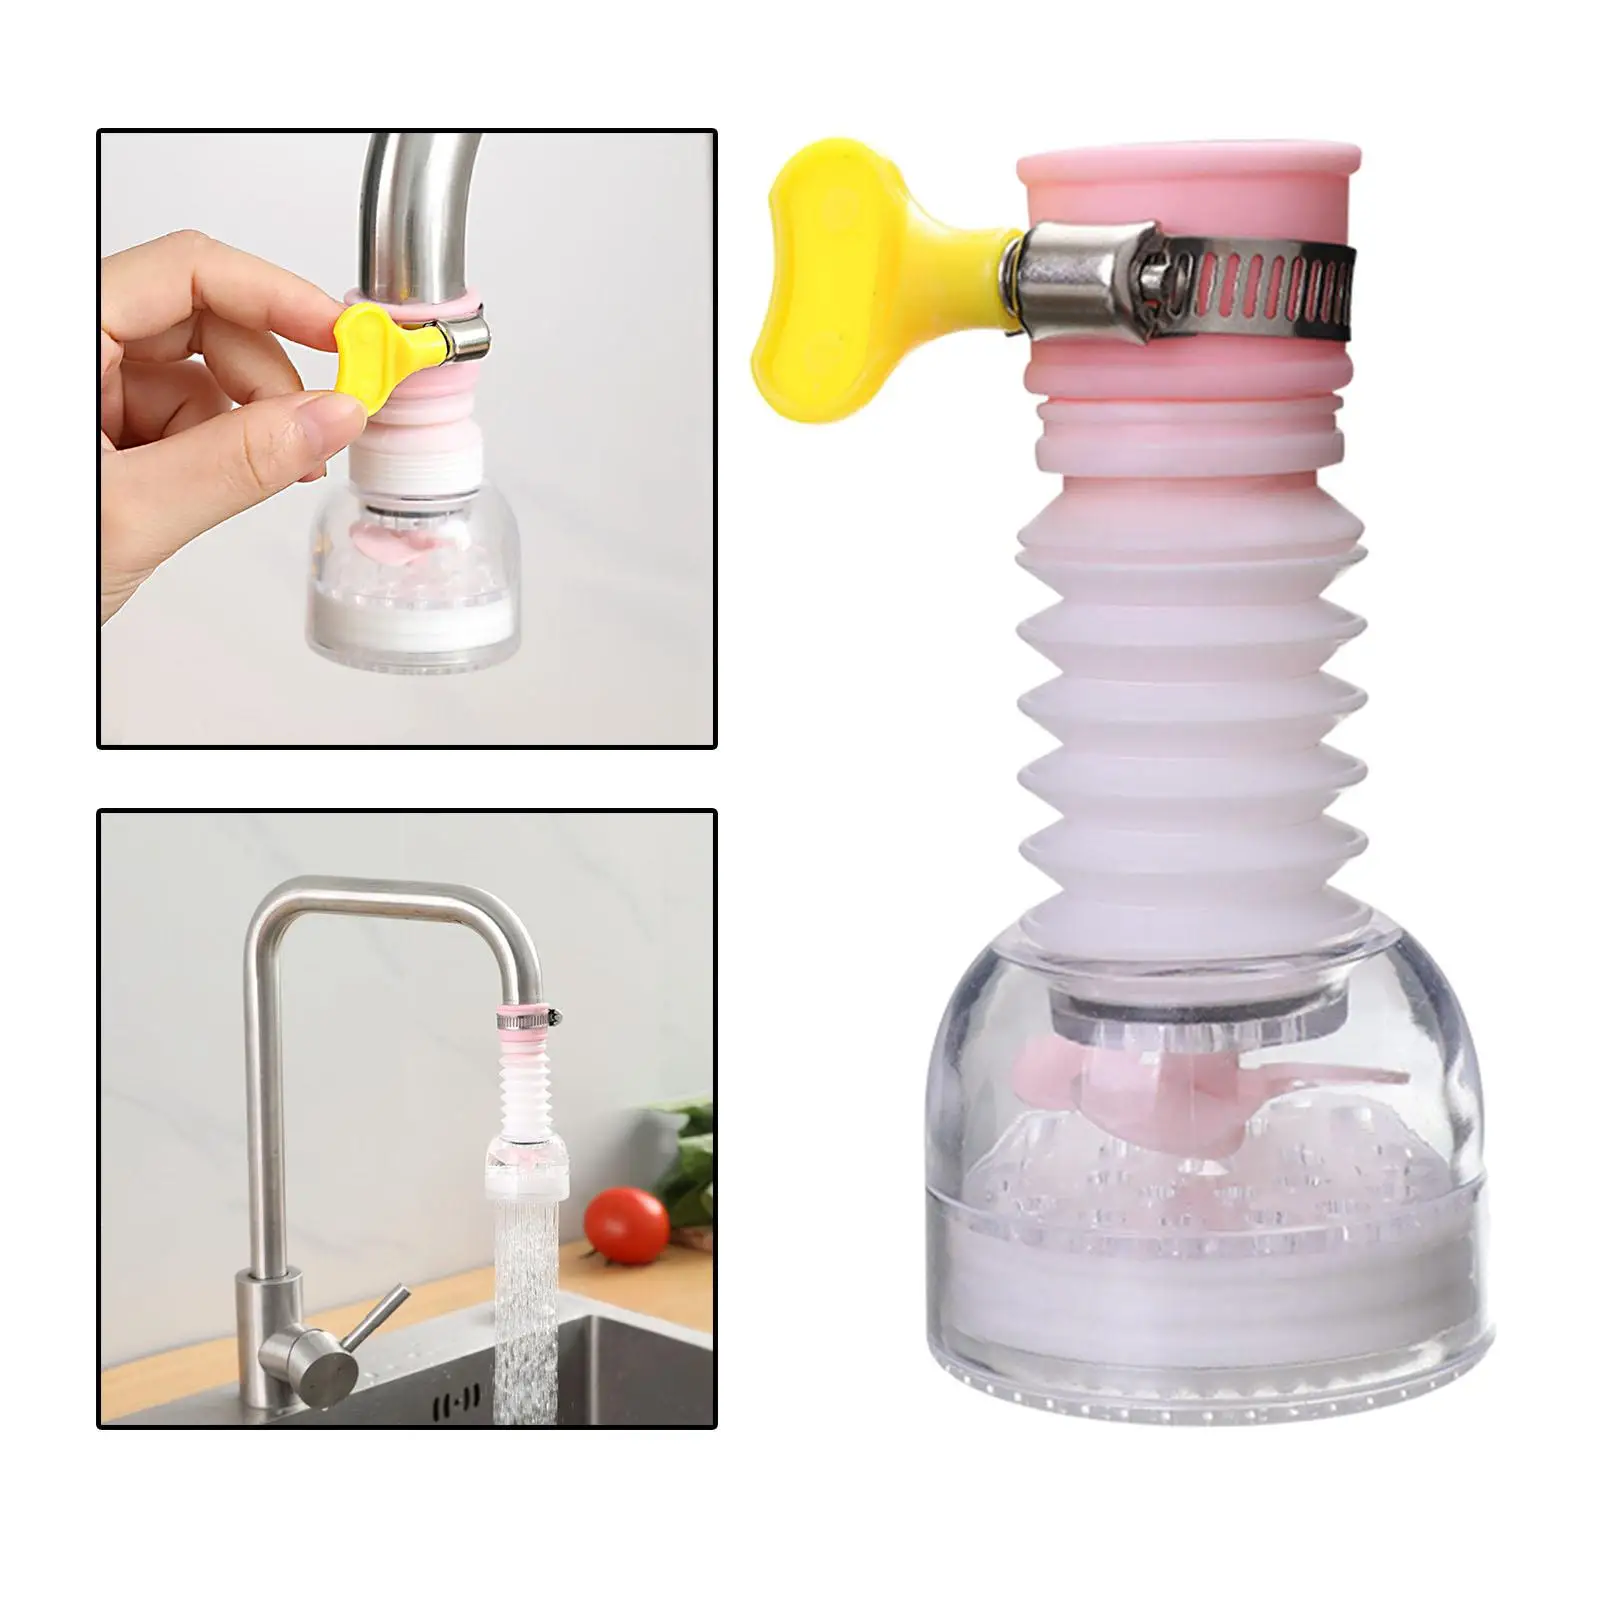 Faucet Splash Filter Universal Spray Head Faucet Booster Nozzle for Kitchen Bathroom